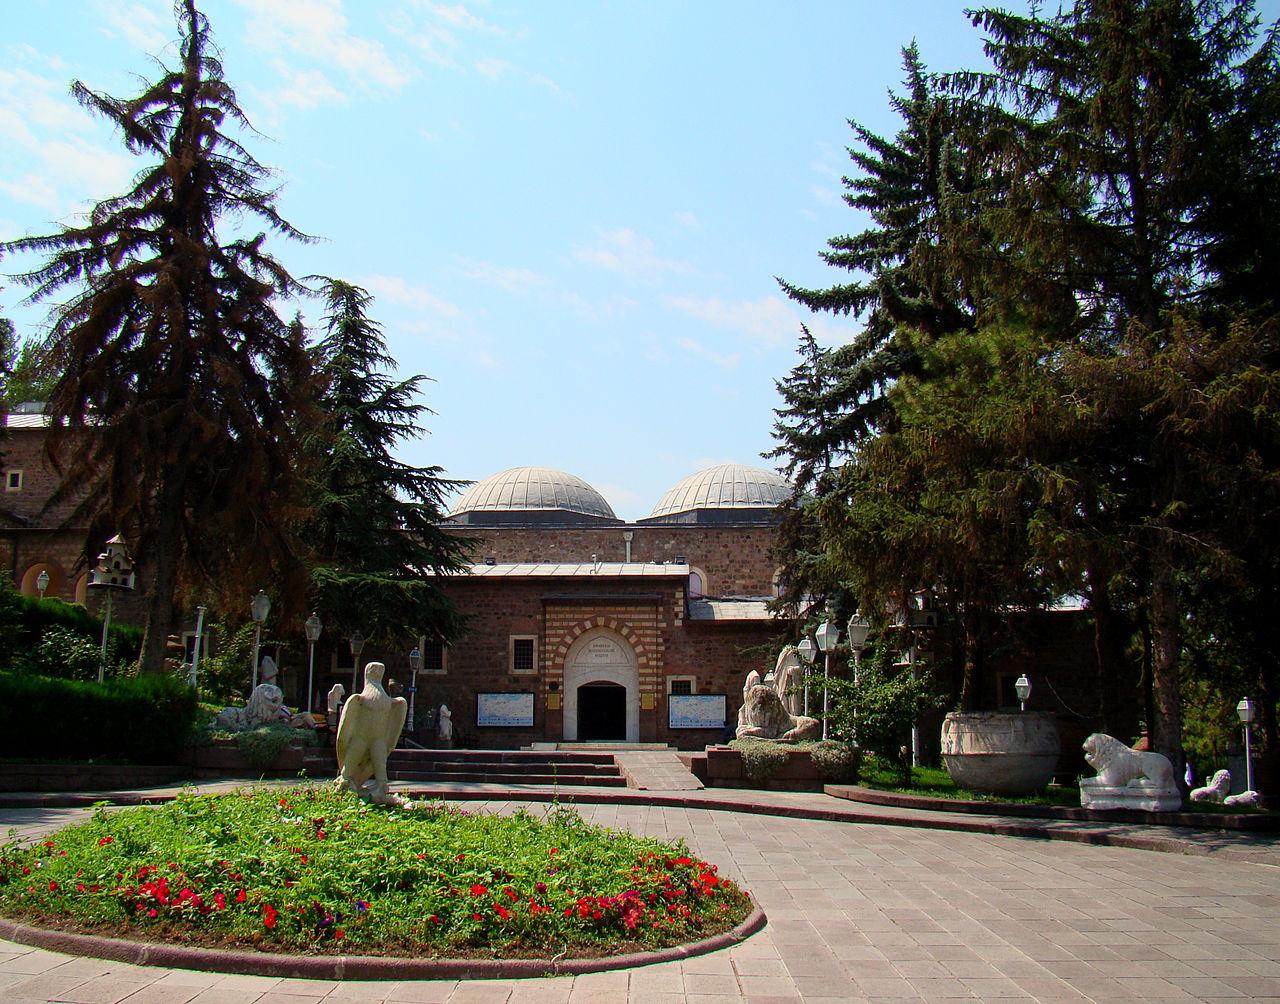 Cover image of this place Museum of Anatolian Civilizations